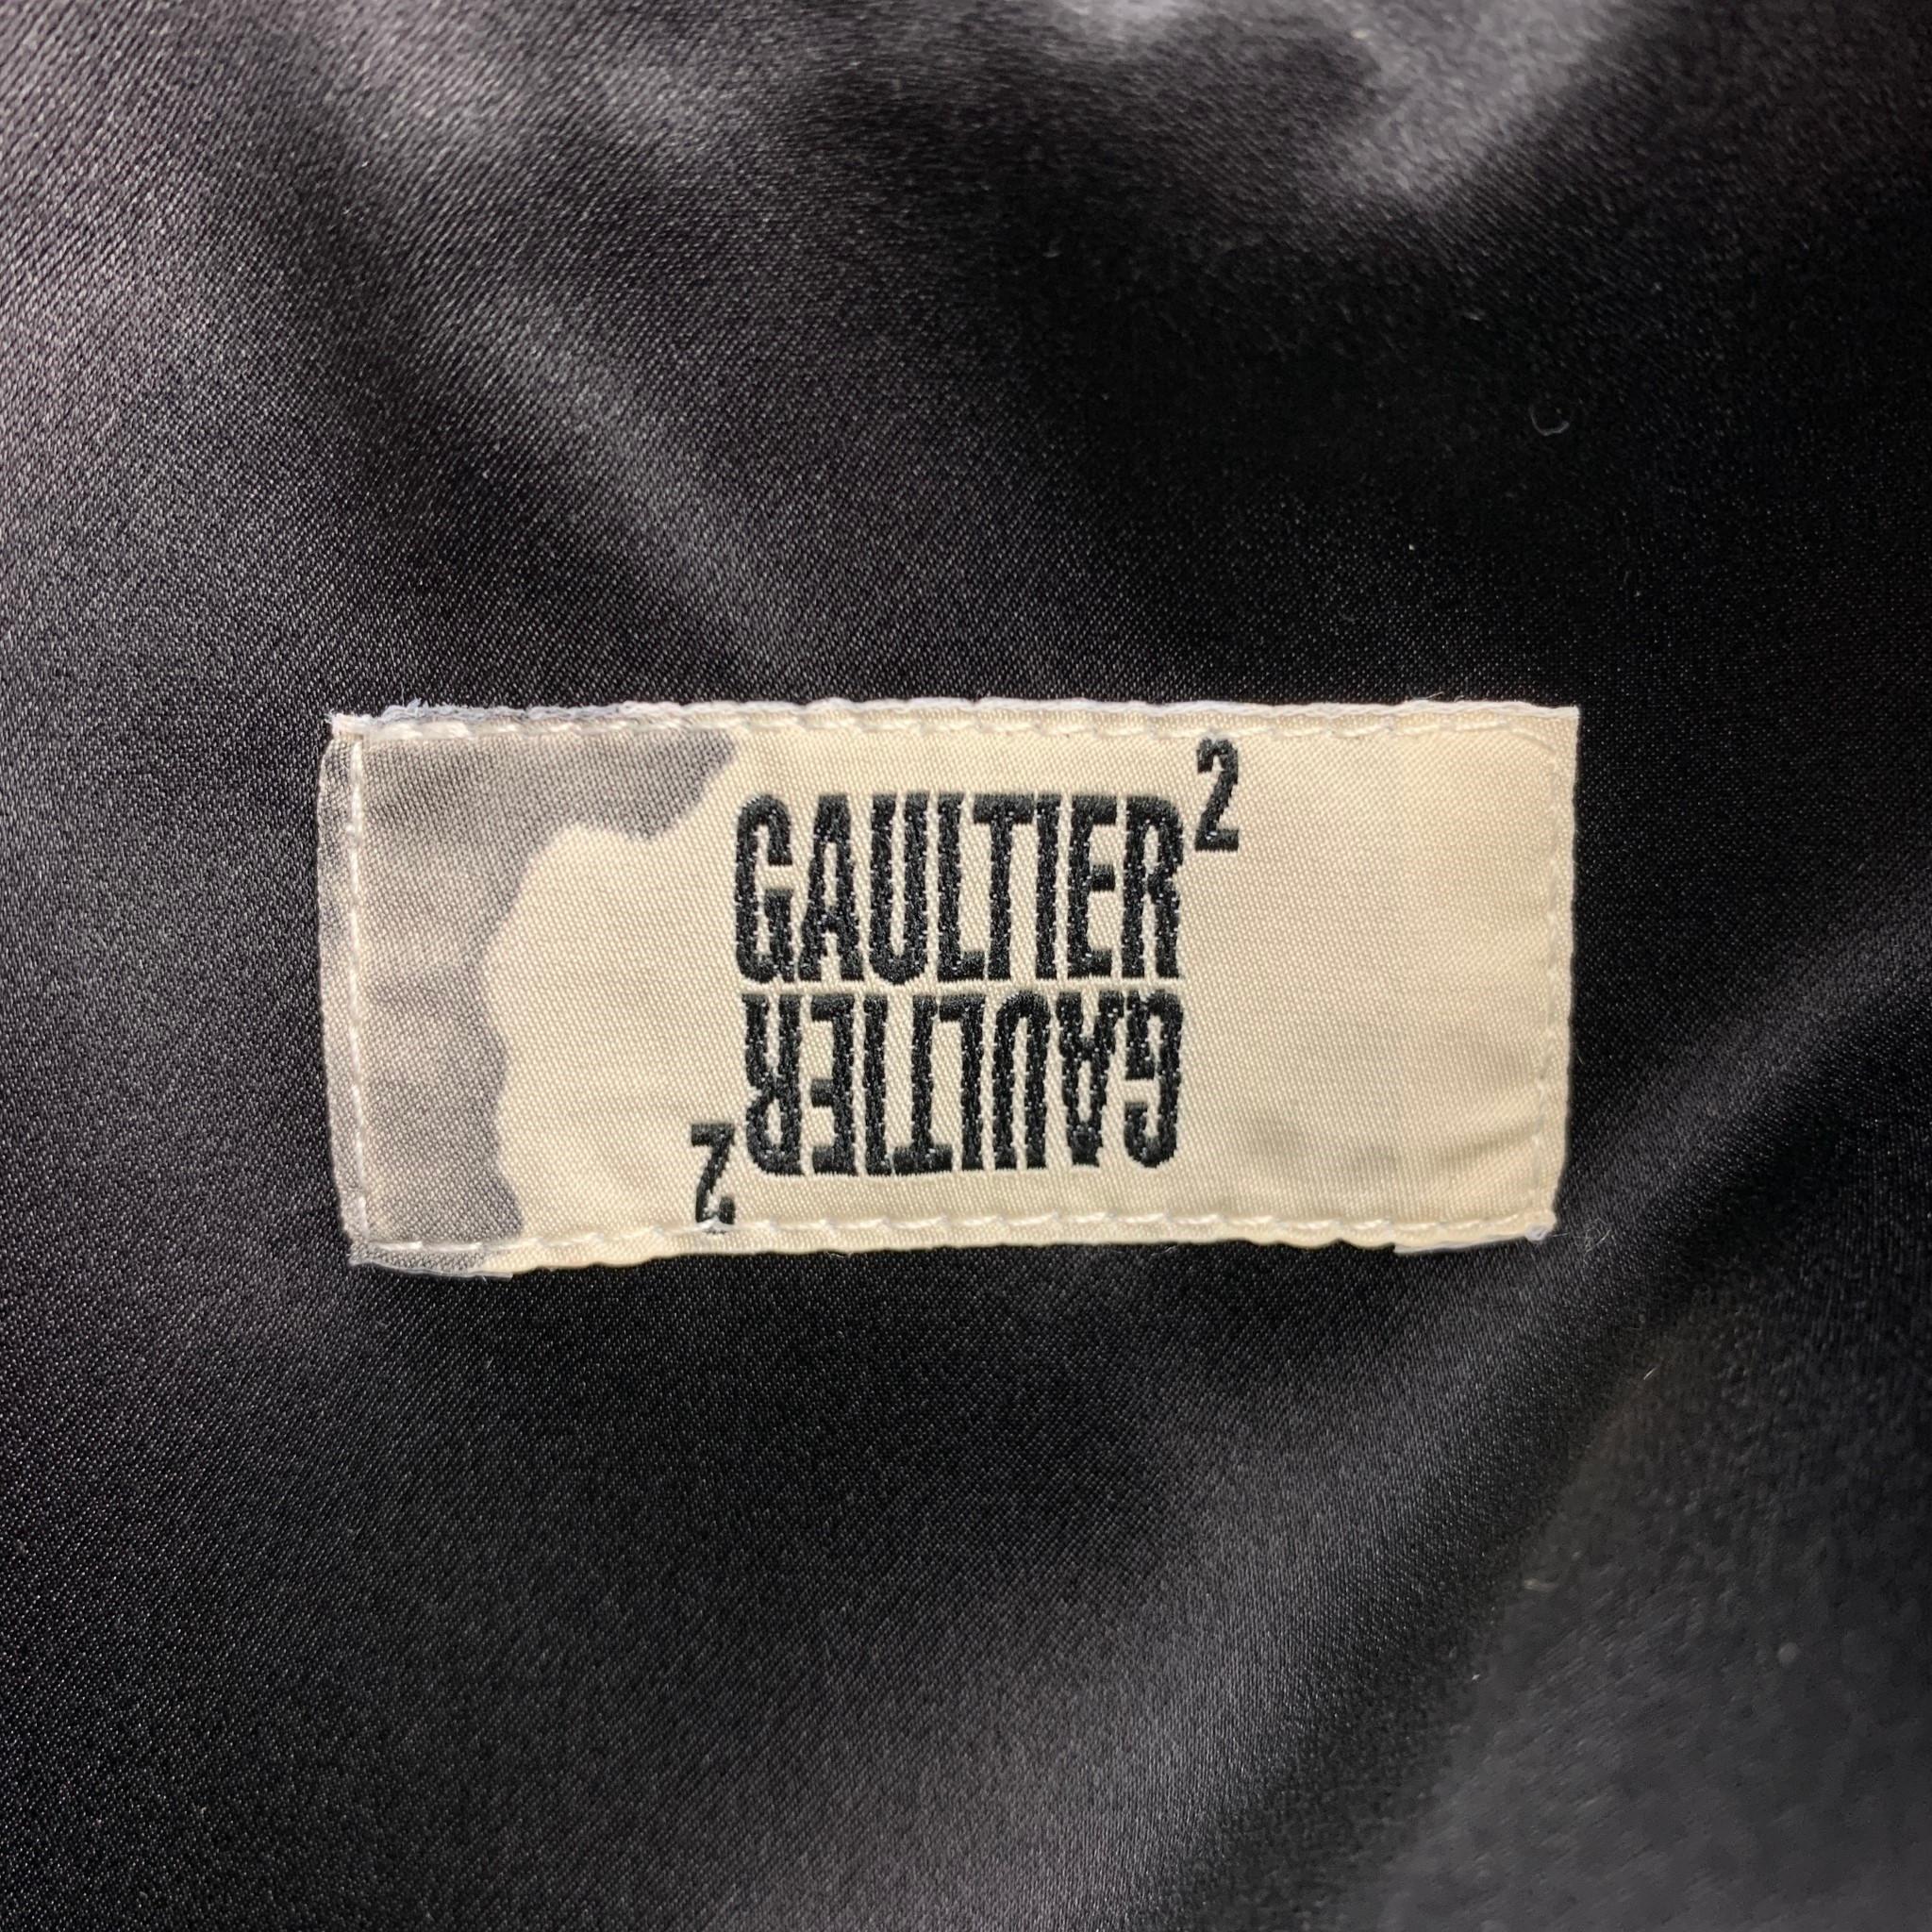 GAULTIER2 by JEAN PAUL GAULTIER Size 8 Black Leather Cropped Motorcycle Jacket 1